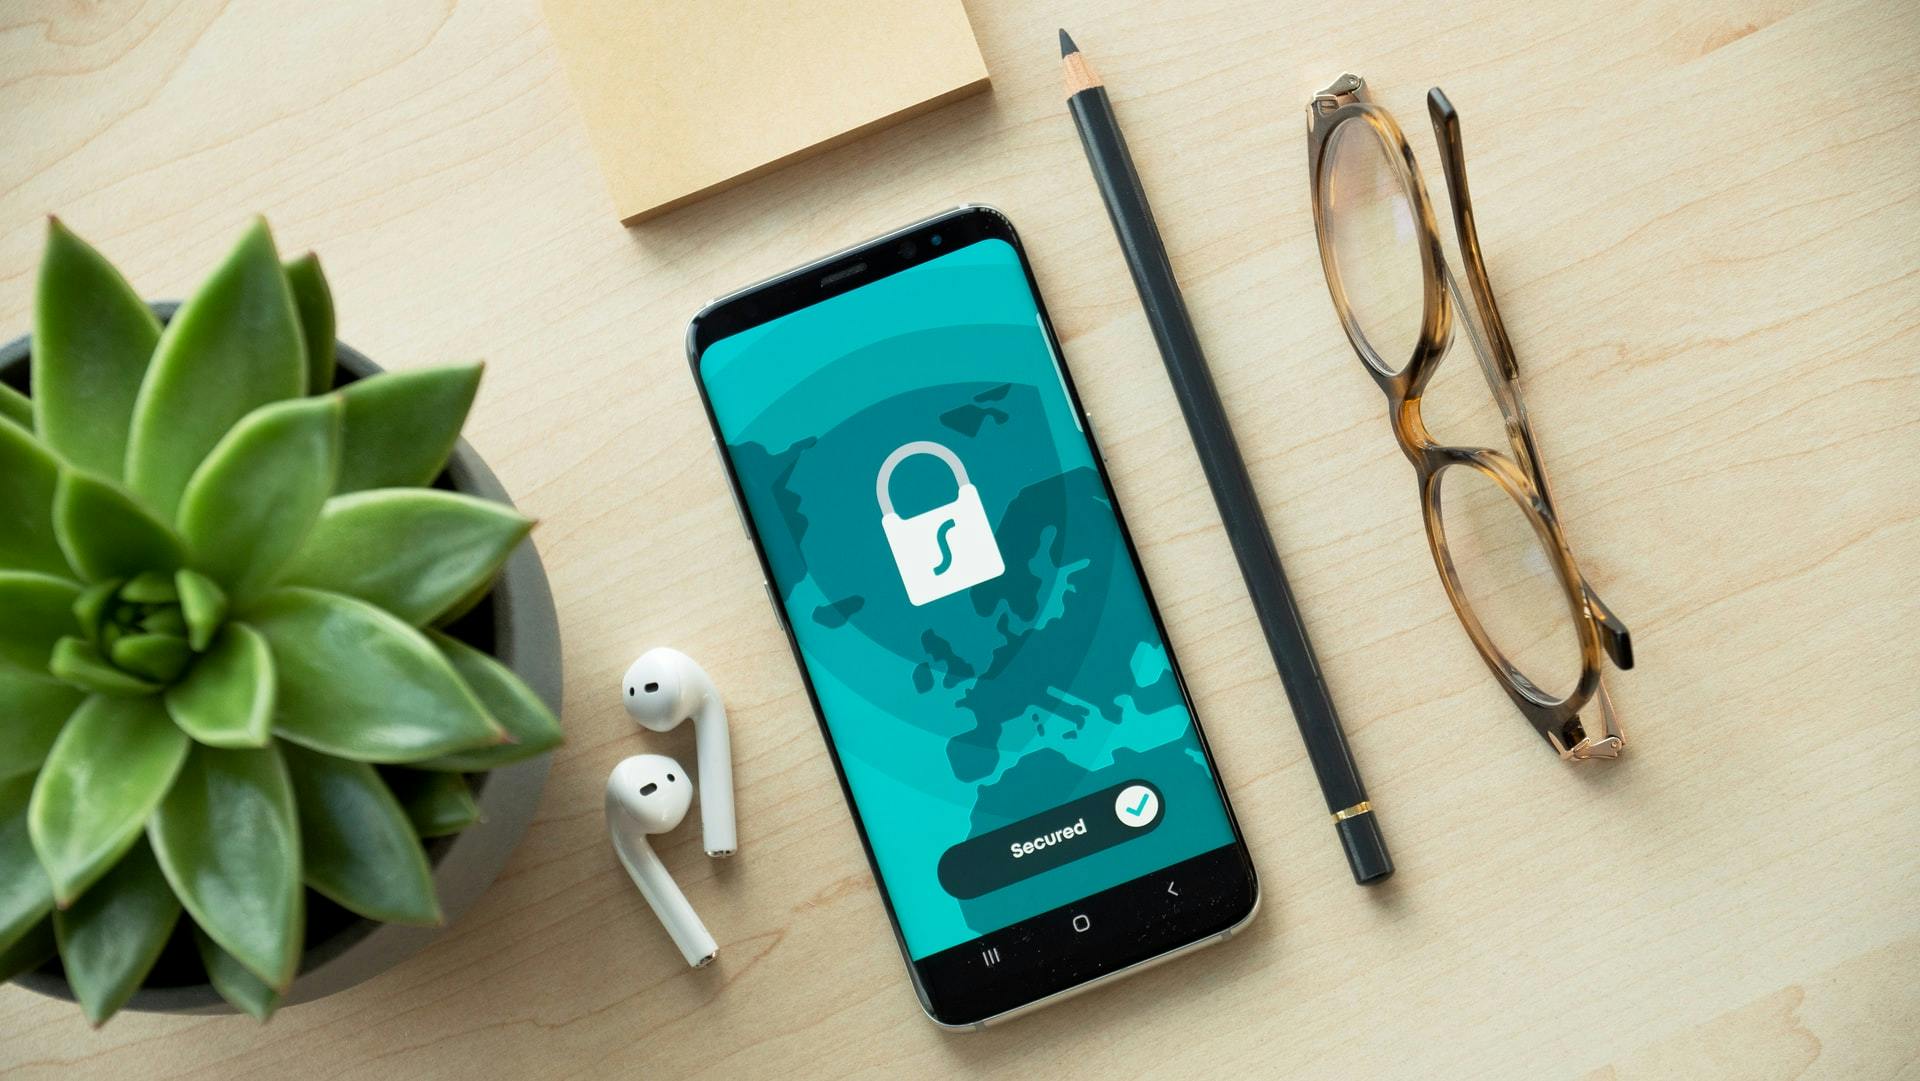 Mobile app security - what you need to know